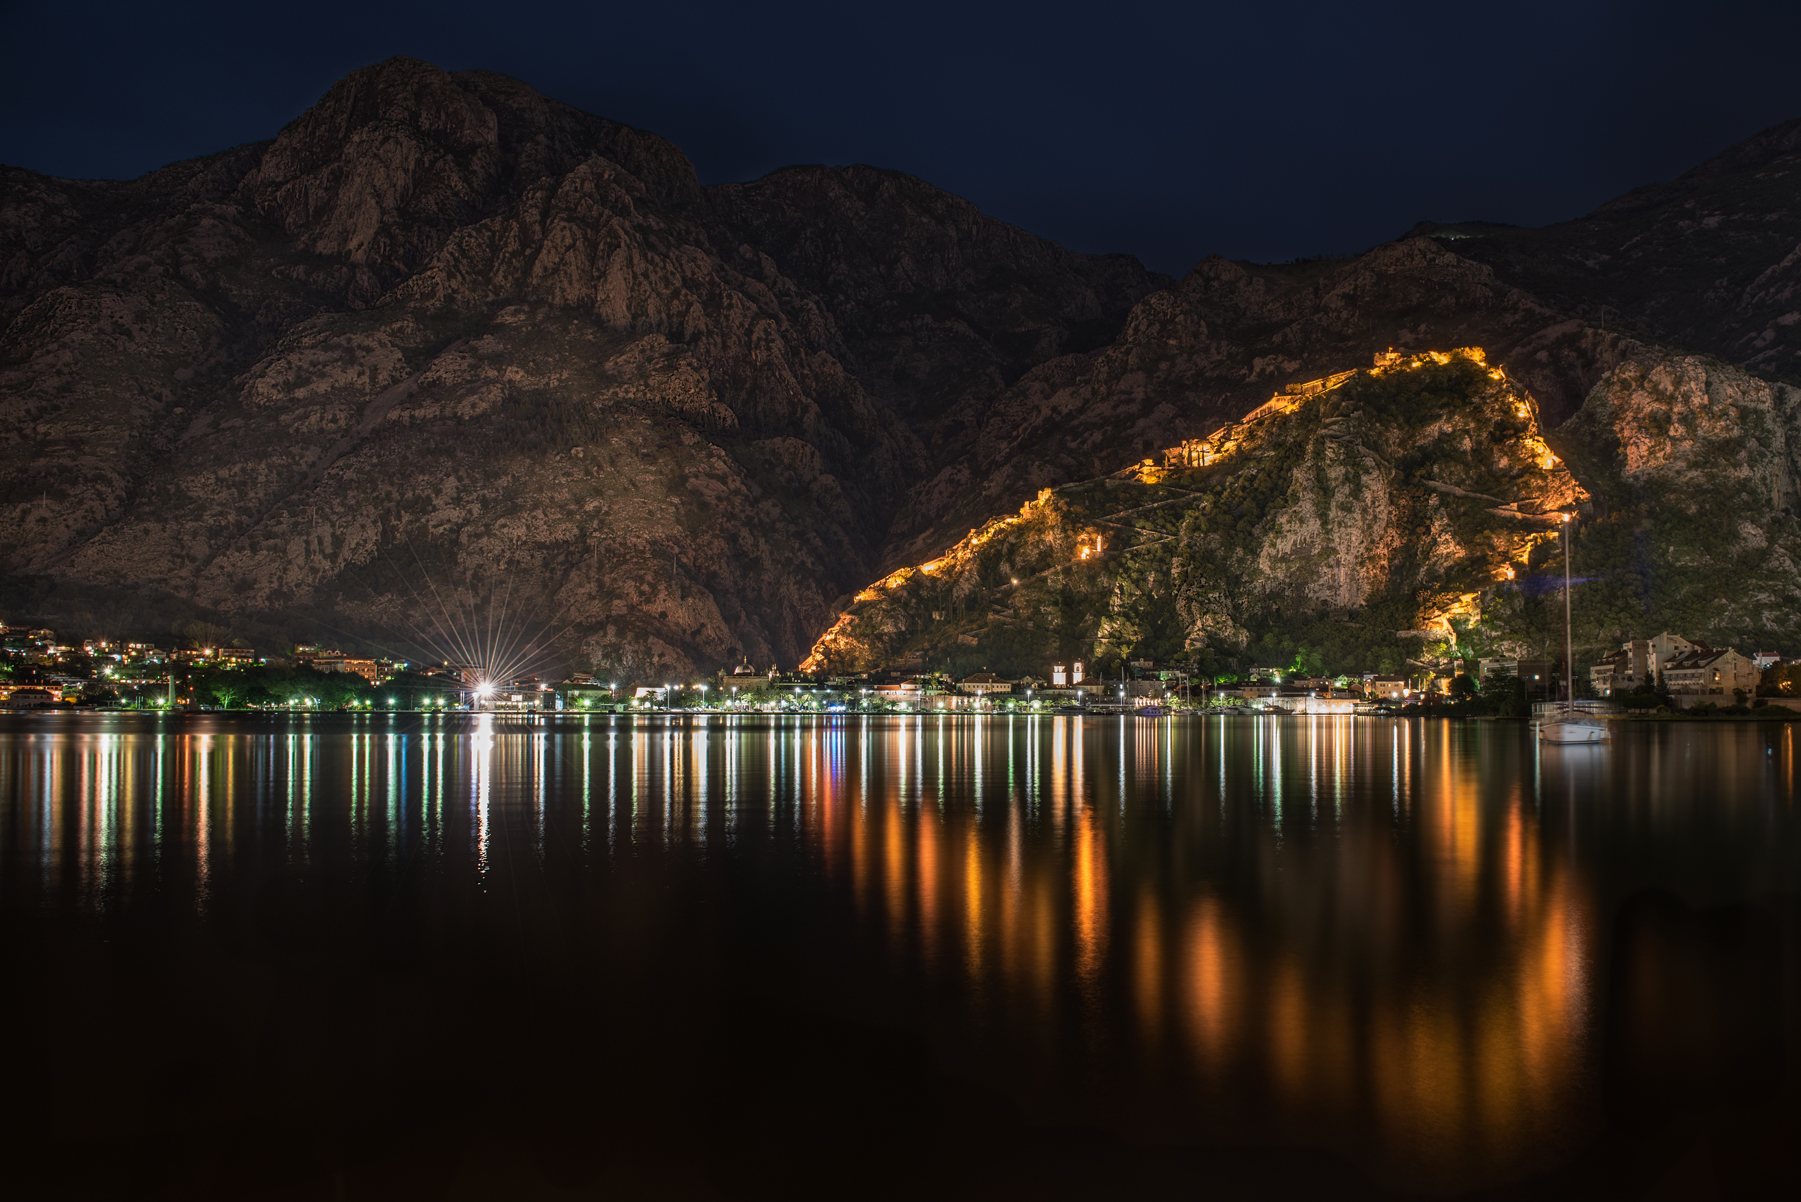 From Kotor with love...